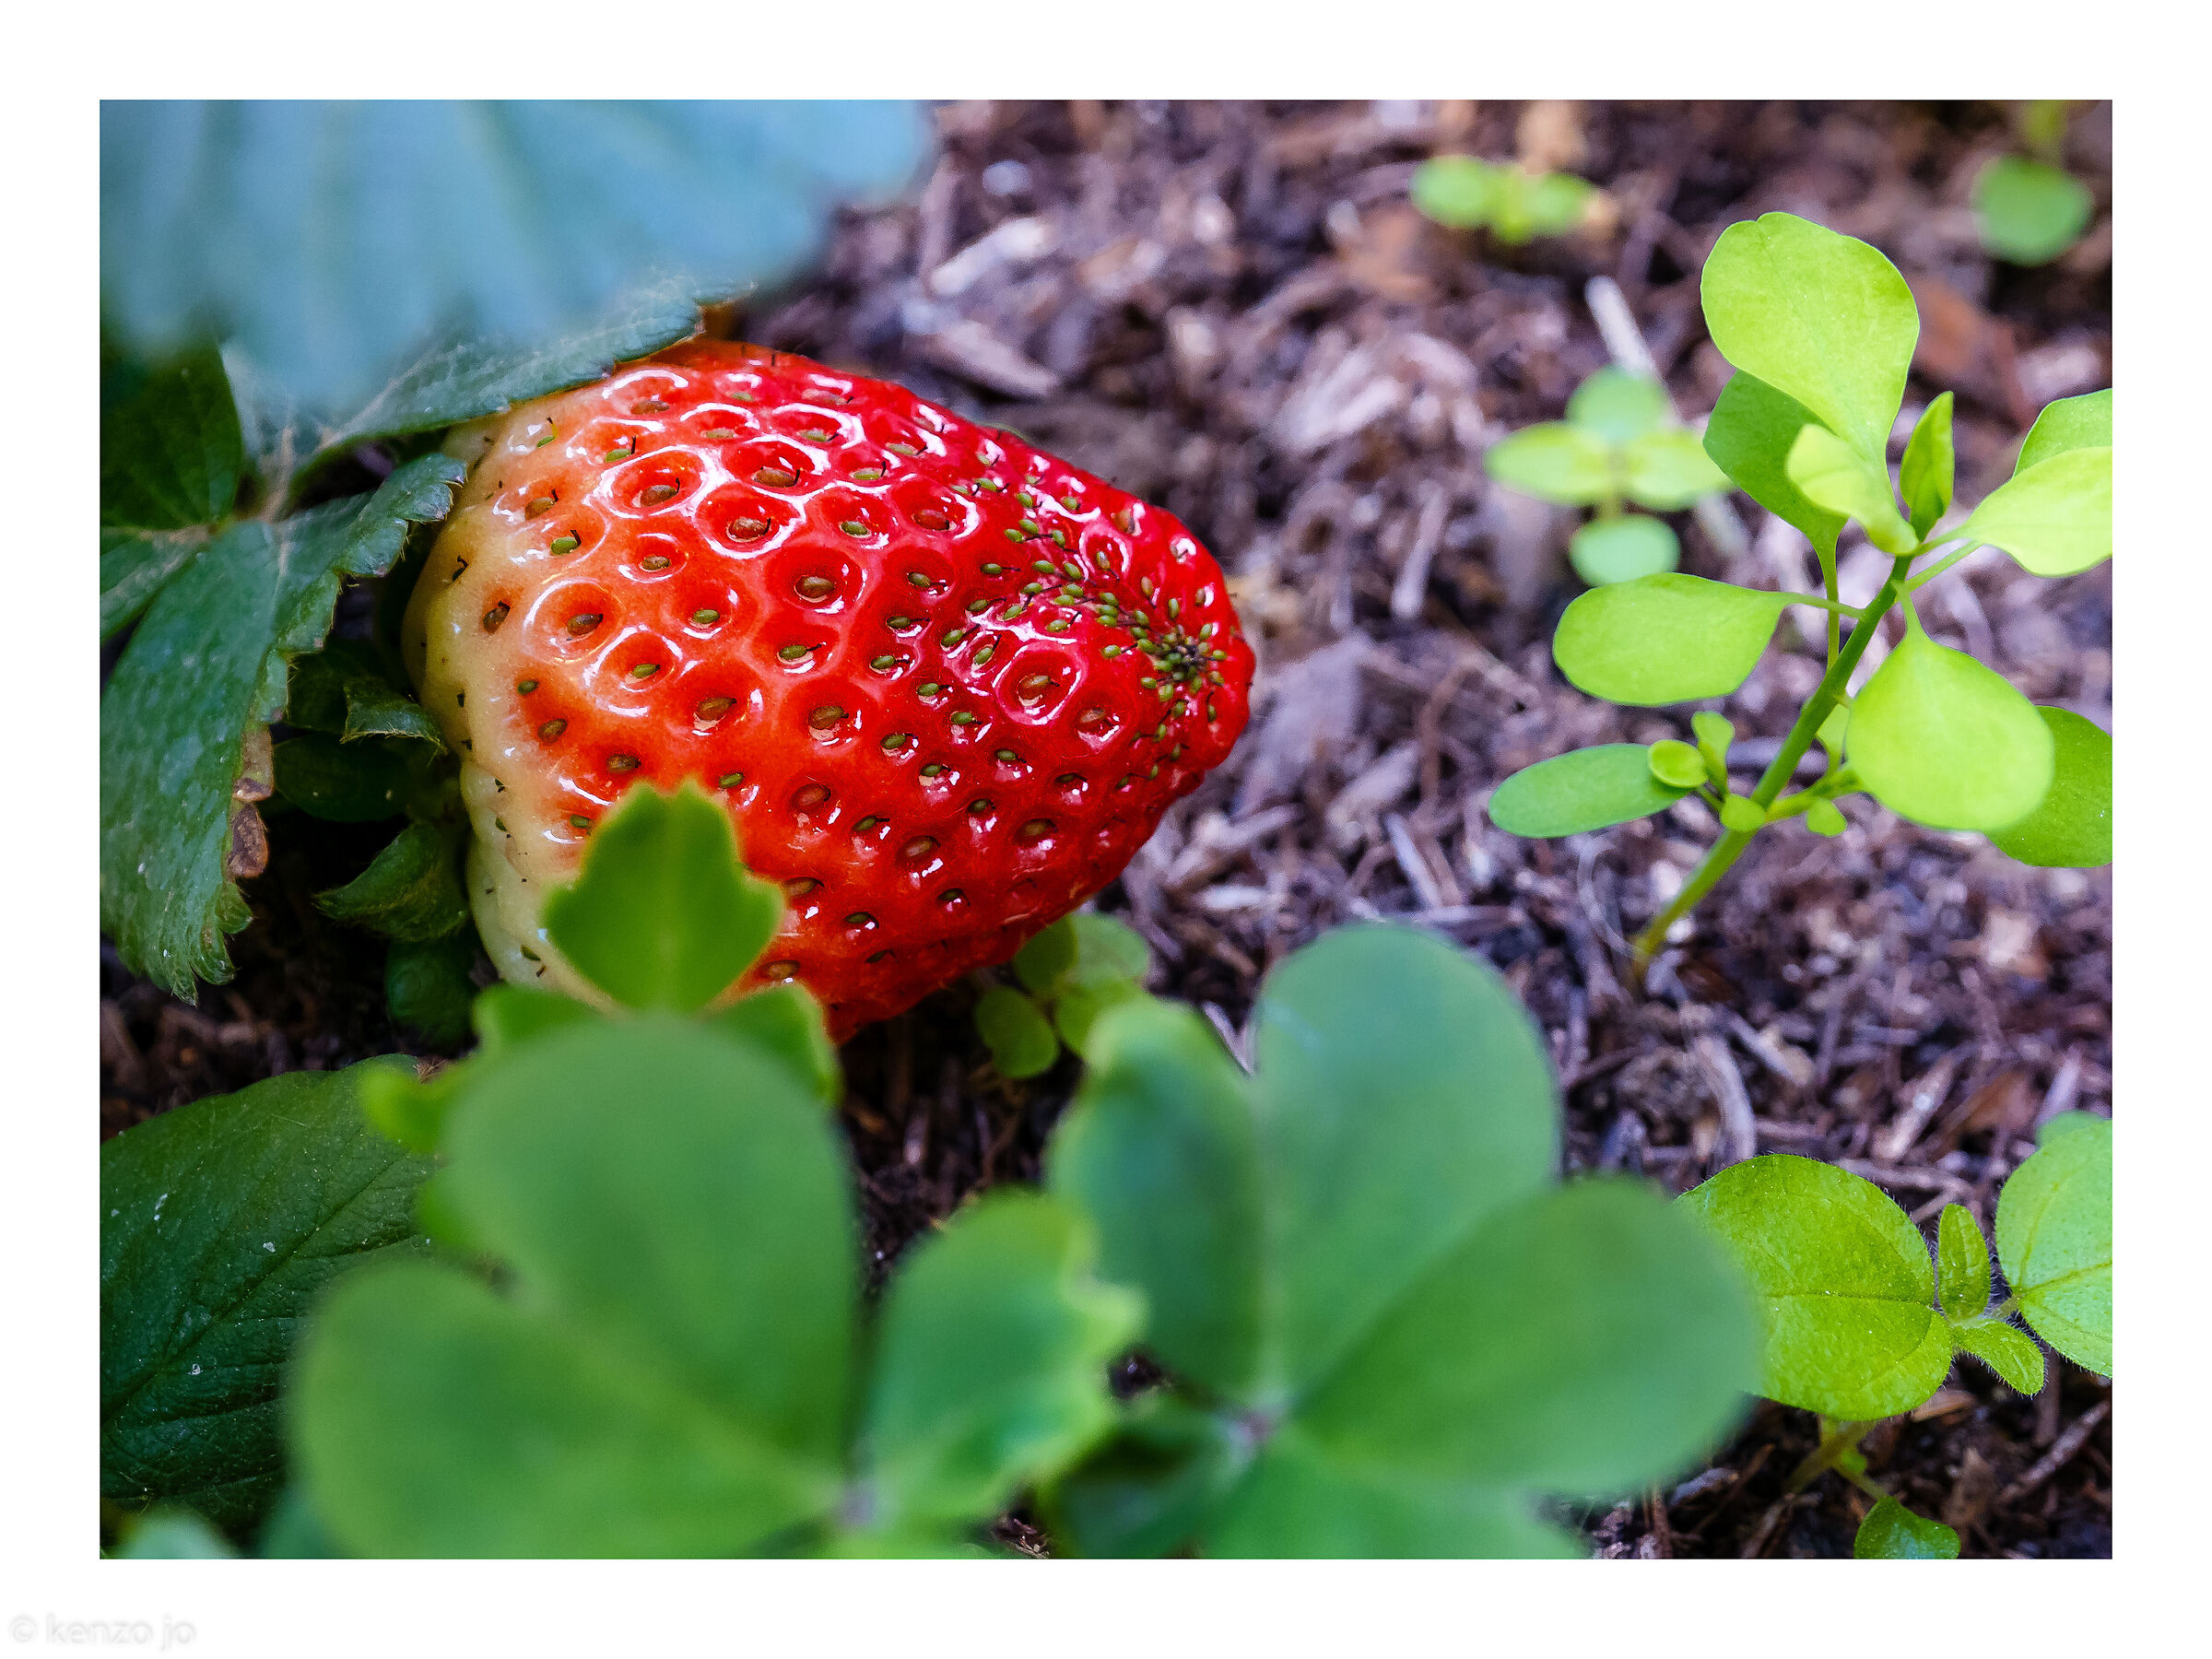 The first strawberry...